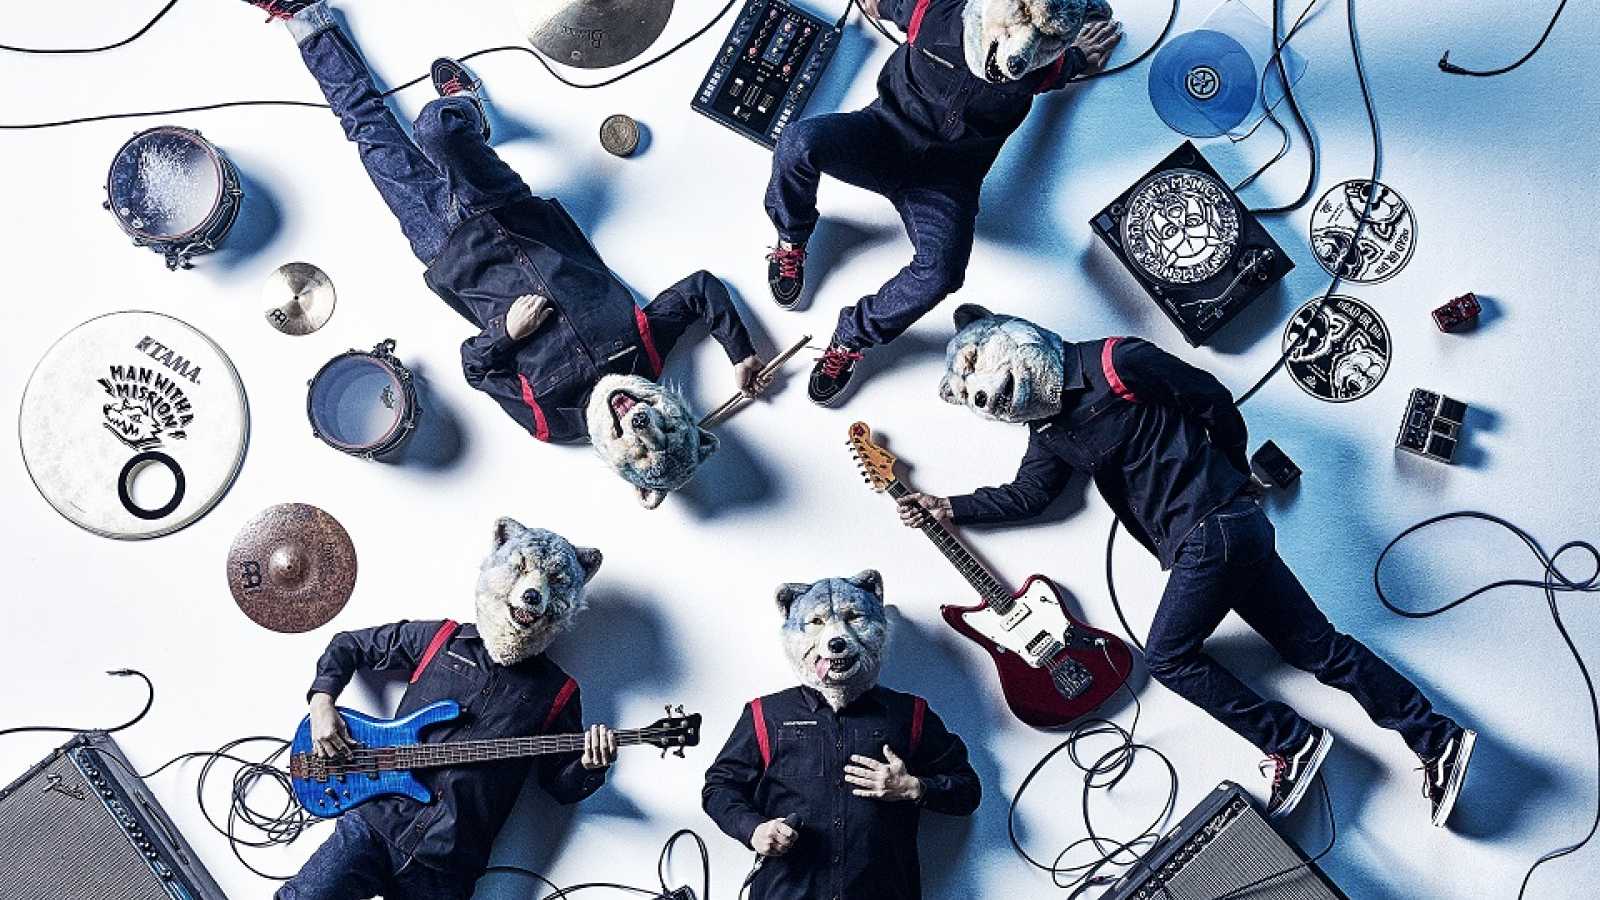 La playlist J-rock de JaME © MAN WITH A MISSION. All rights reserved.